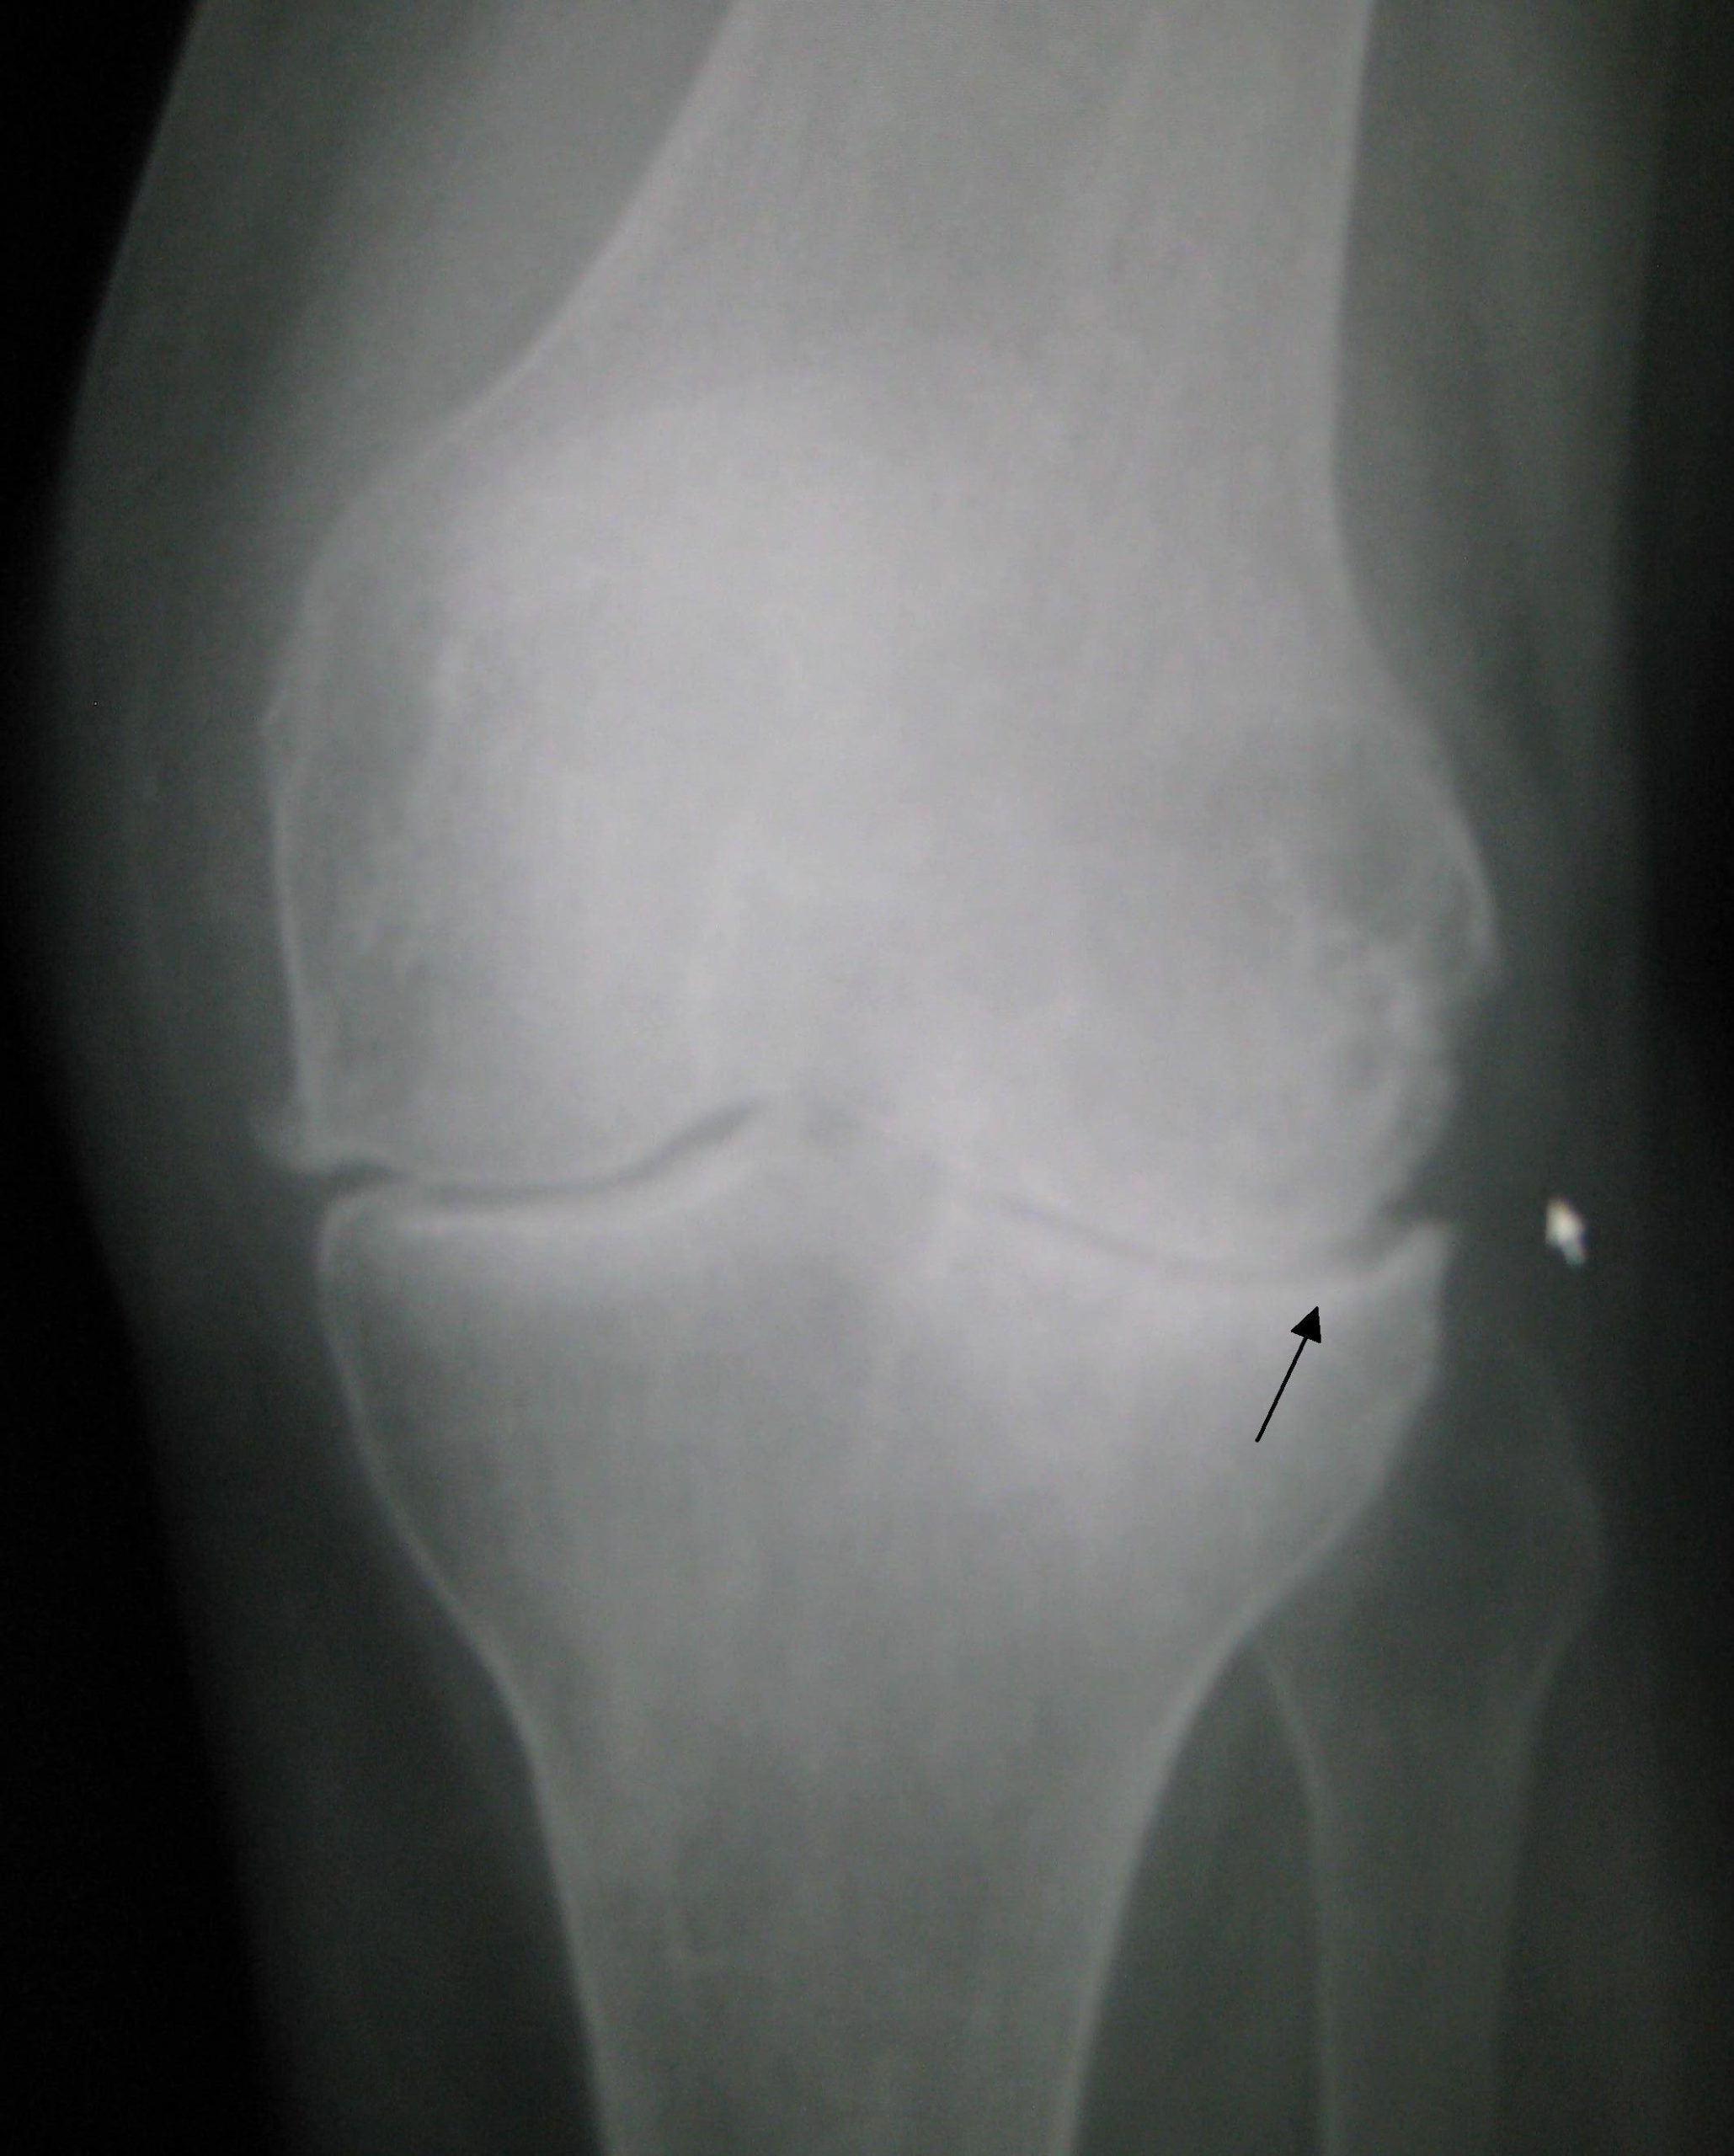 OA in the knee. Note the narrowed joint space.